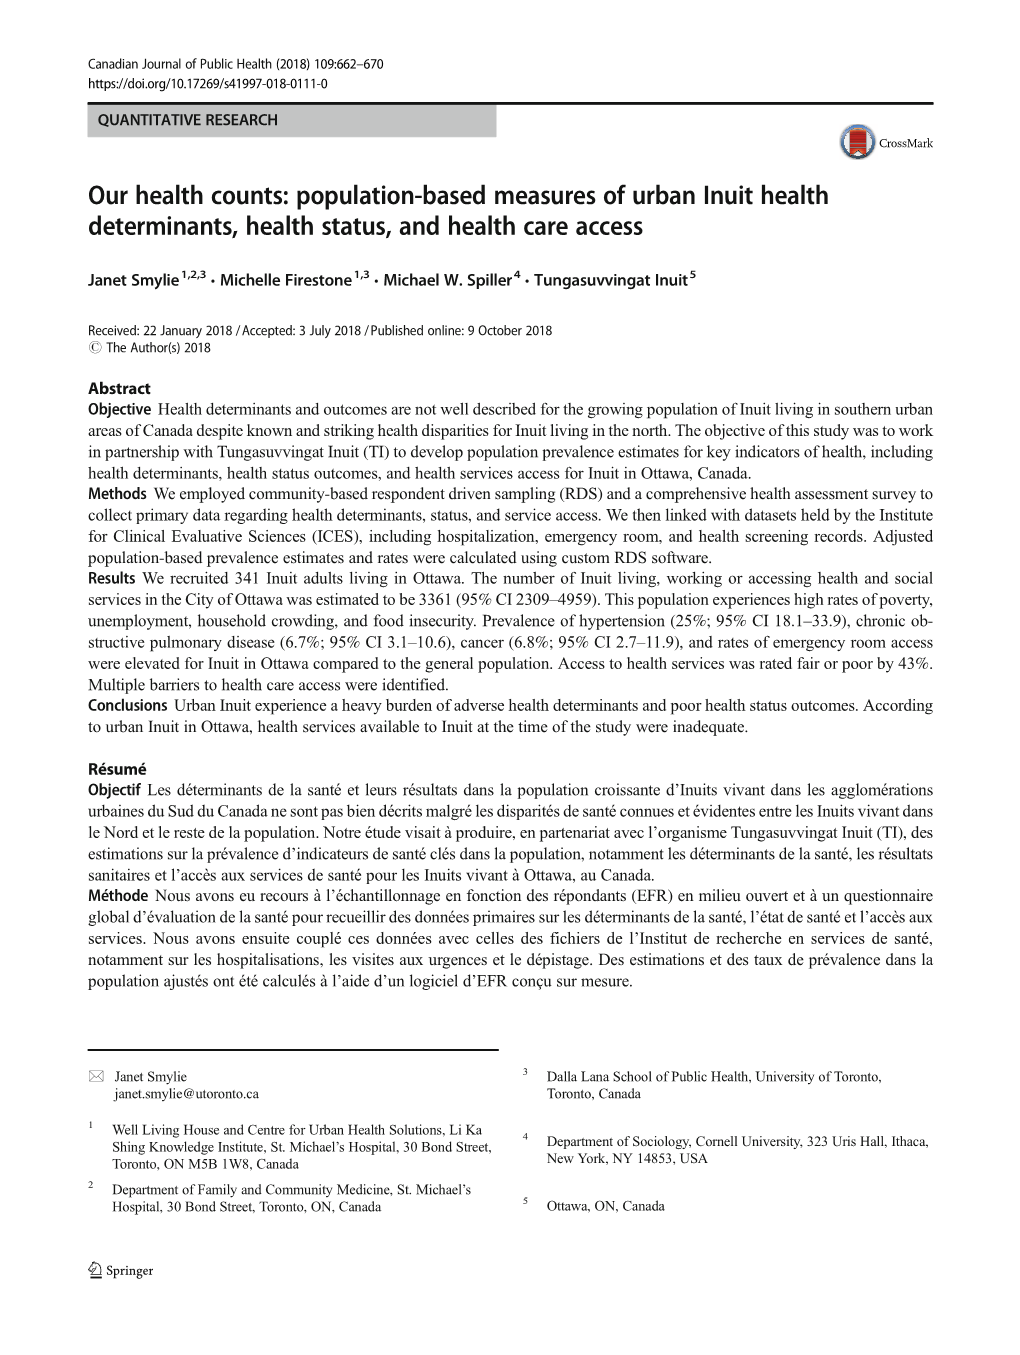 Population-Based Measures of Urban Inuit Health Determinants, Health Status, and Health Care Access